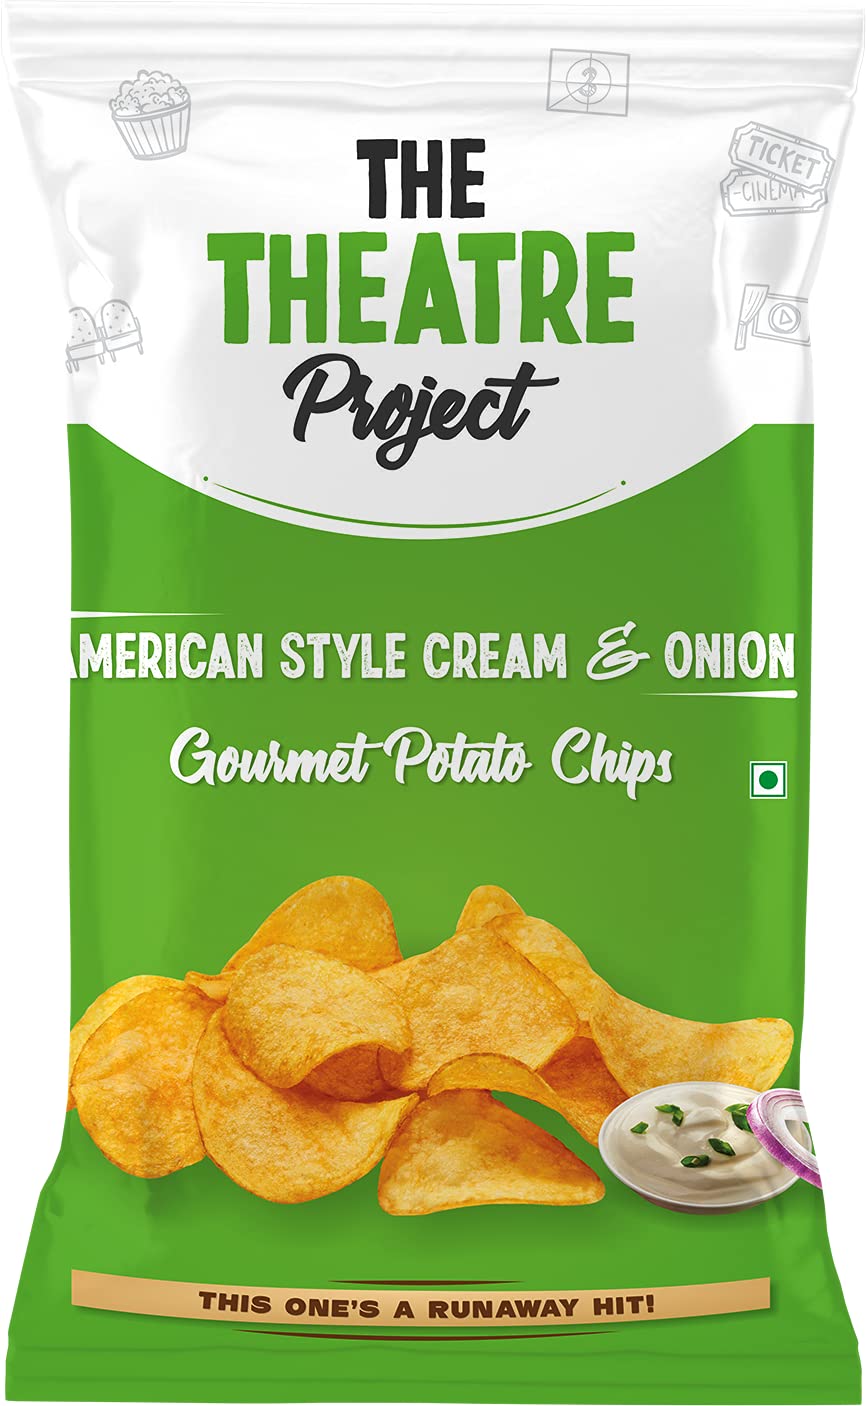 The Theater Project American Style Cream & Onion Image